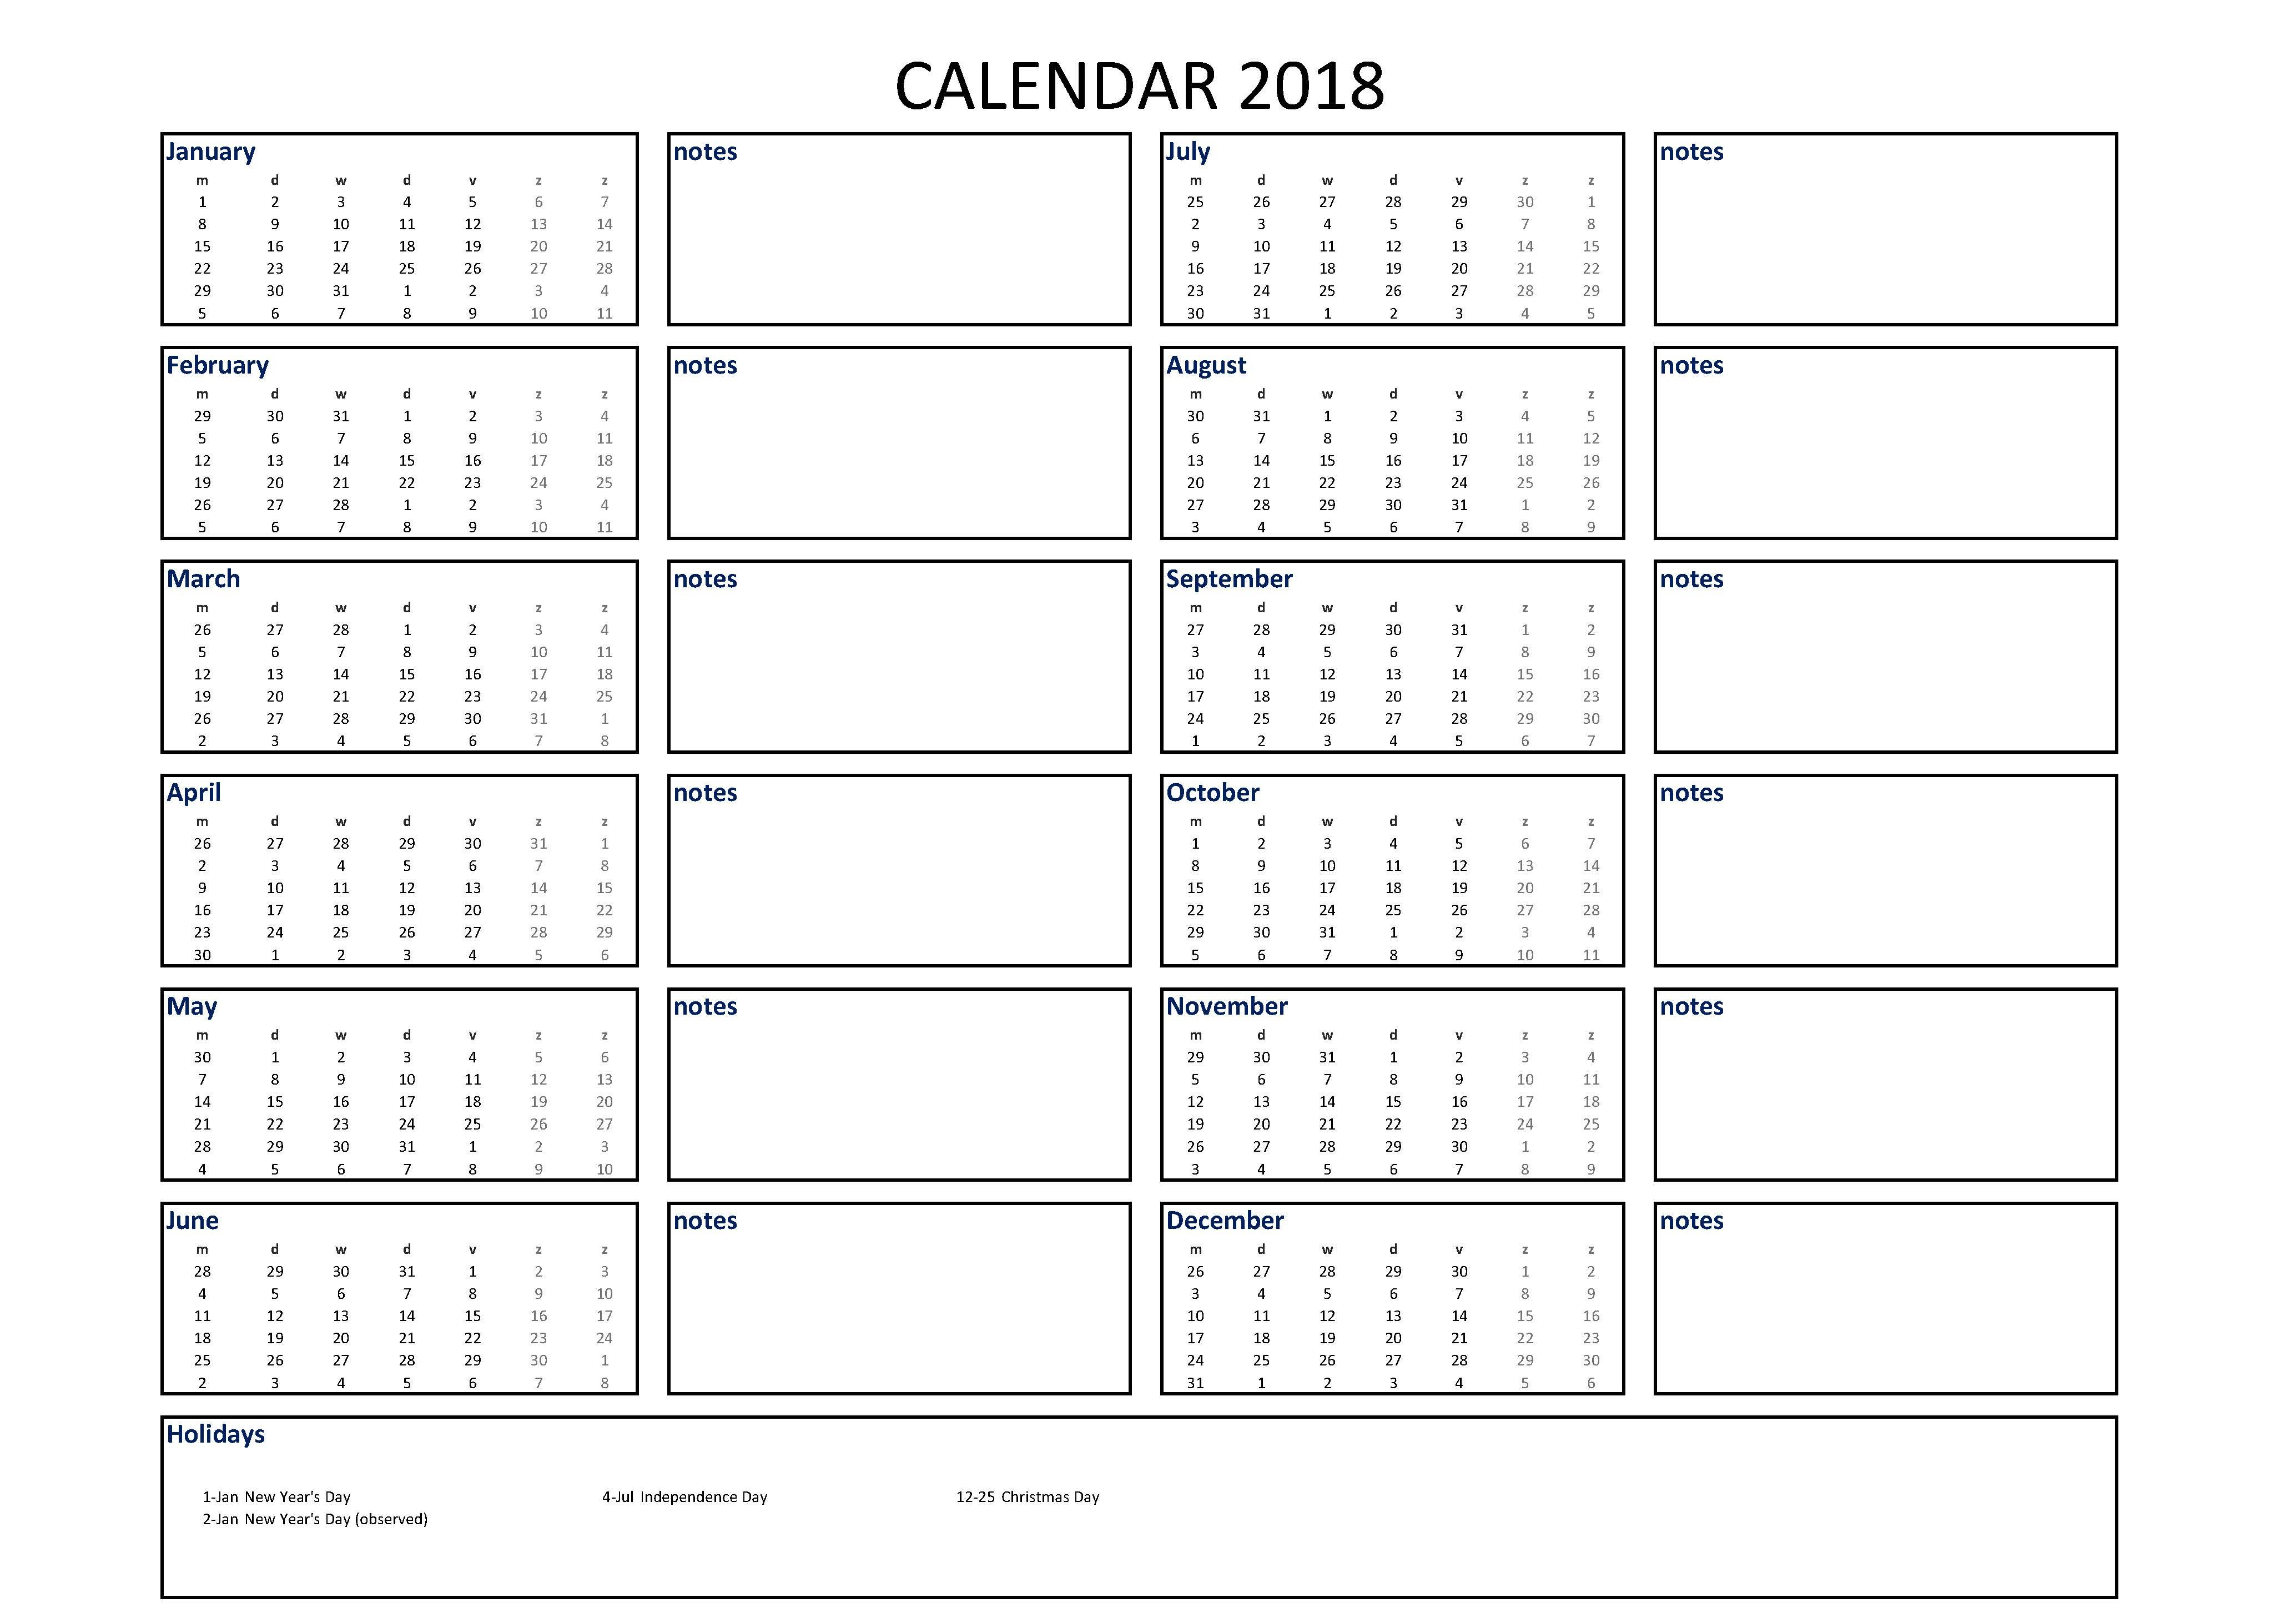 Yearly Calendar With Notes - Wpa.wpart.co